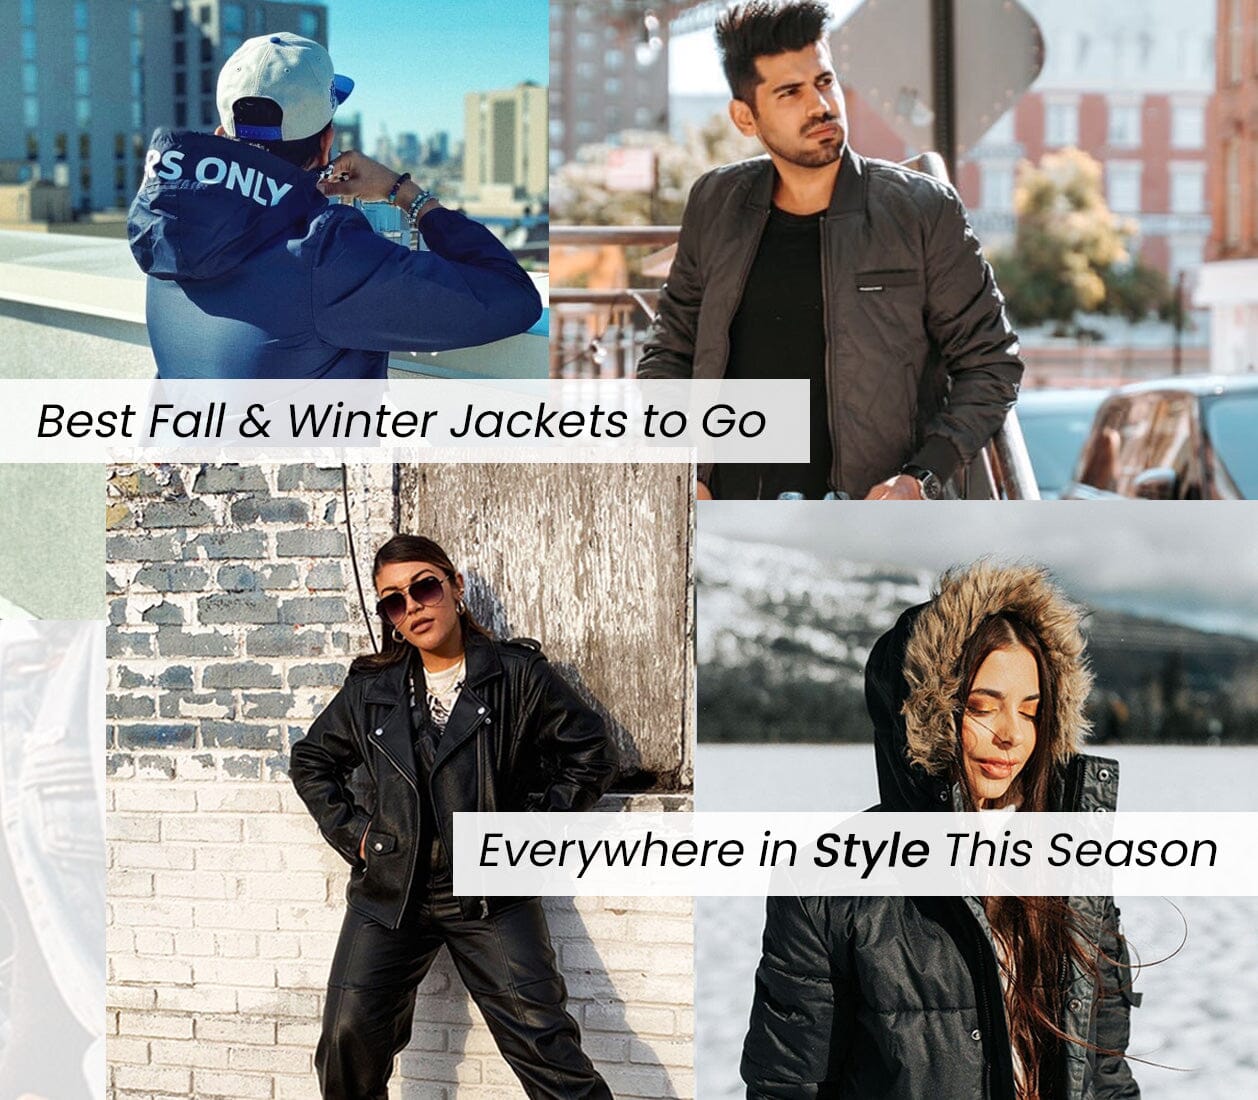 Best Fall & Winter Jackets to Go Everywhere in Style This Season